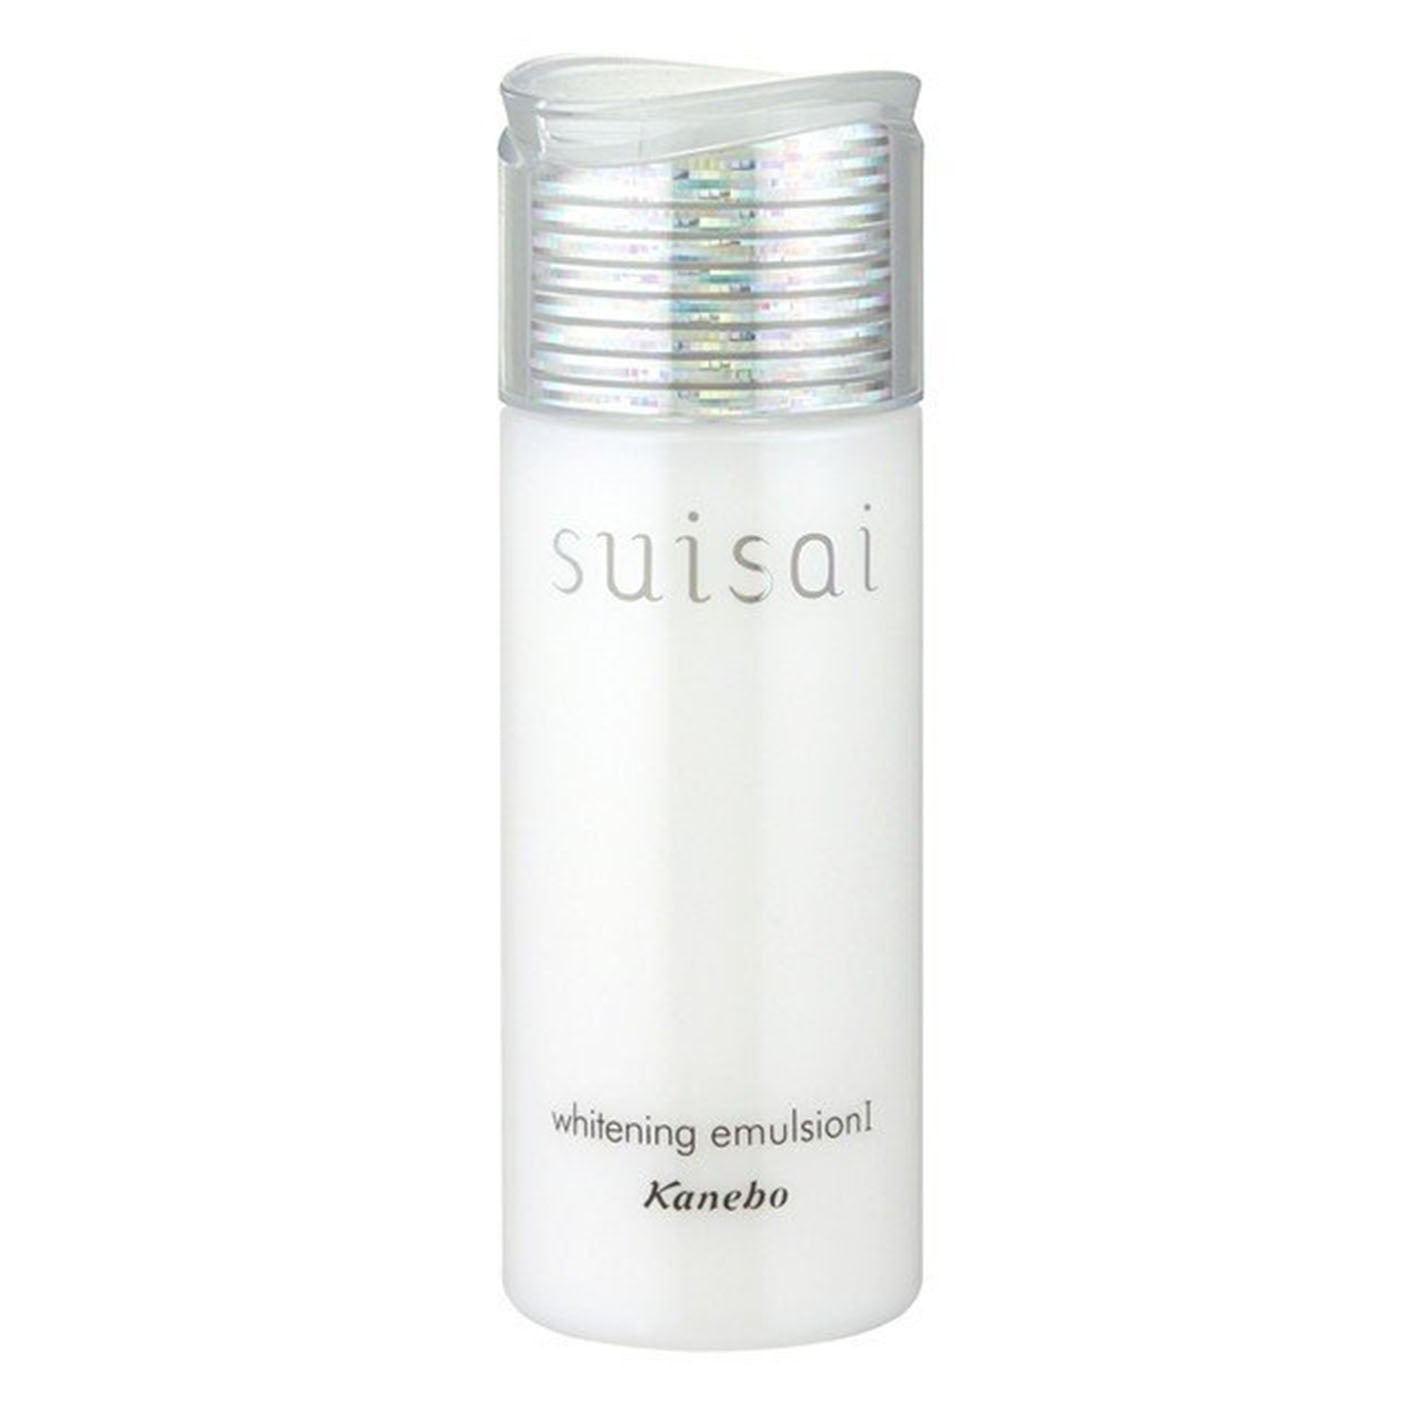 Kanebo Suisai Whitening Emulsion 100ml - Clear - Harajuku Culture Japan - Japanease Products Store Beauty and Stationery